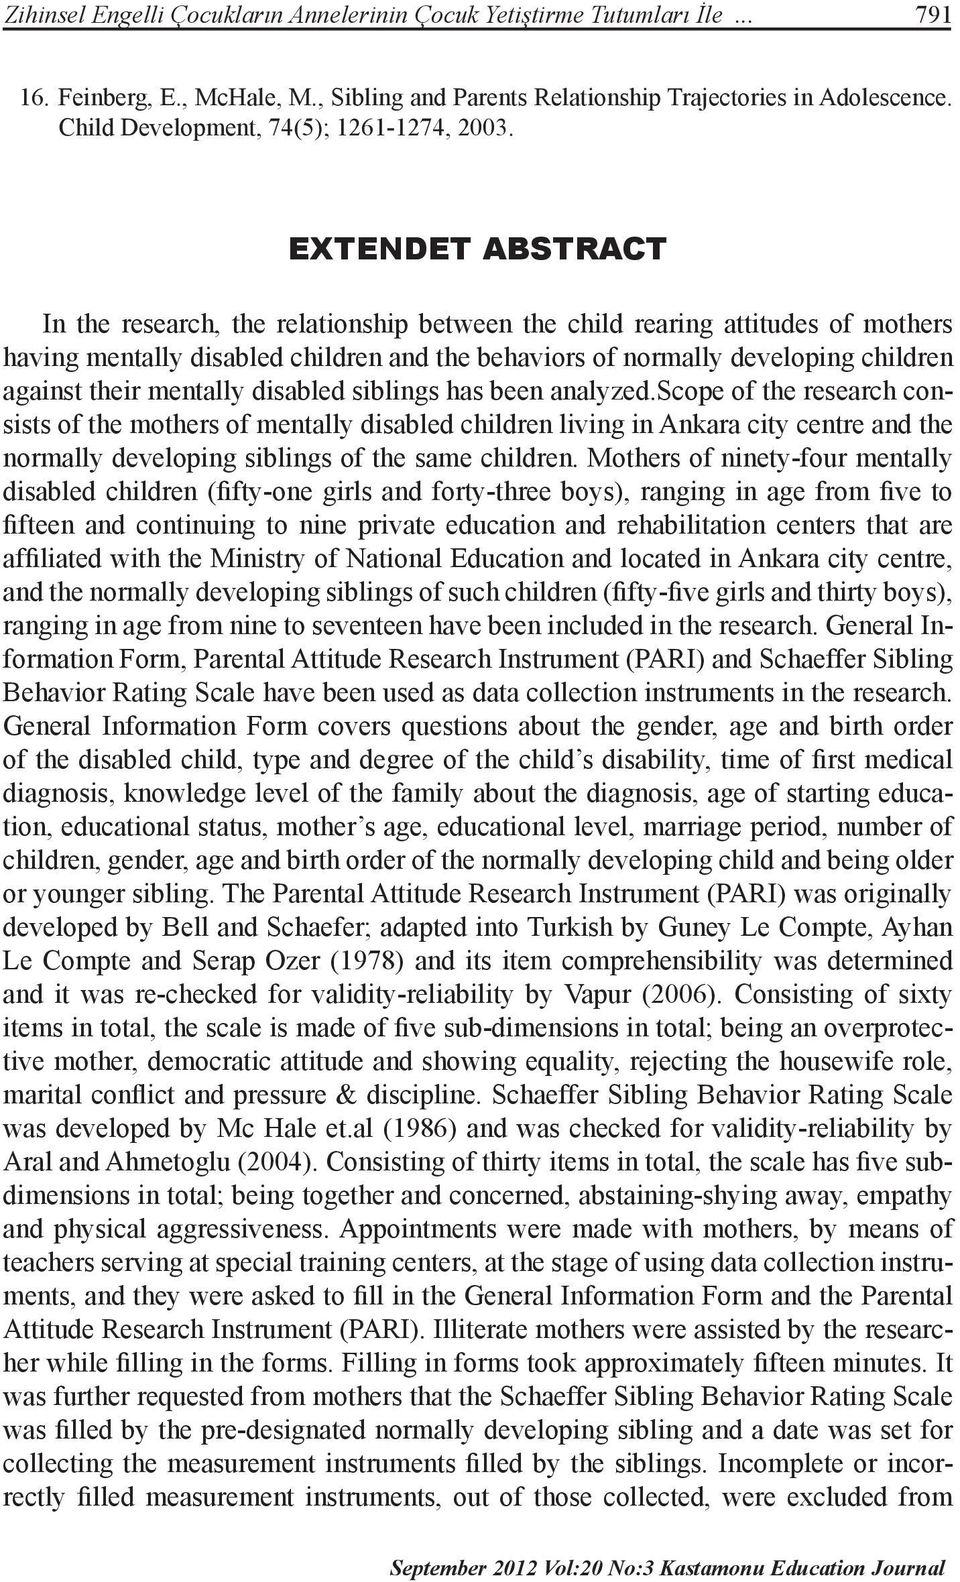 EXTENDET ABSTRACT In the research, the relationship between the child rearing attitudes of mothers having mentally disabled children and the behaviors of normally developing children against their